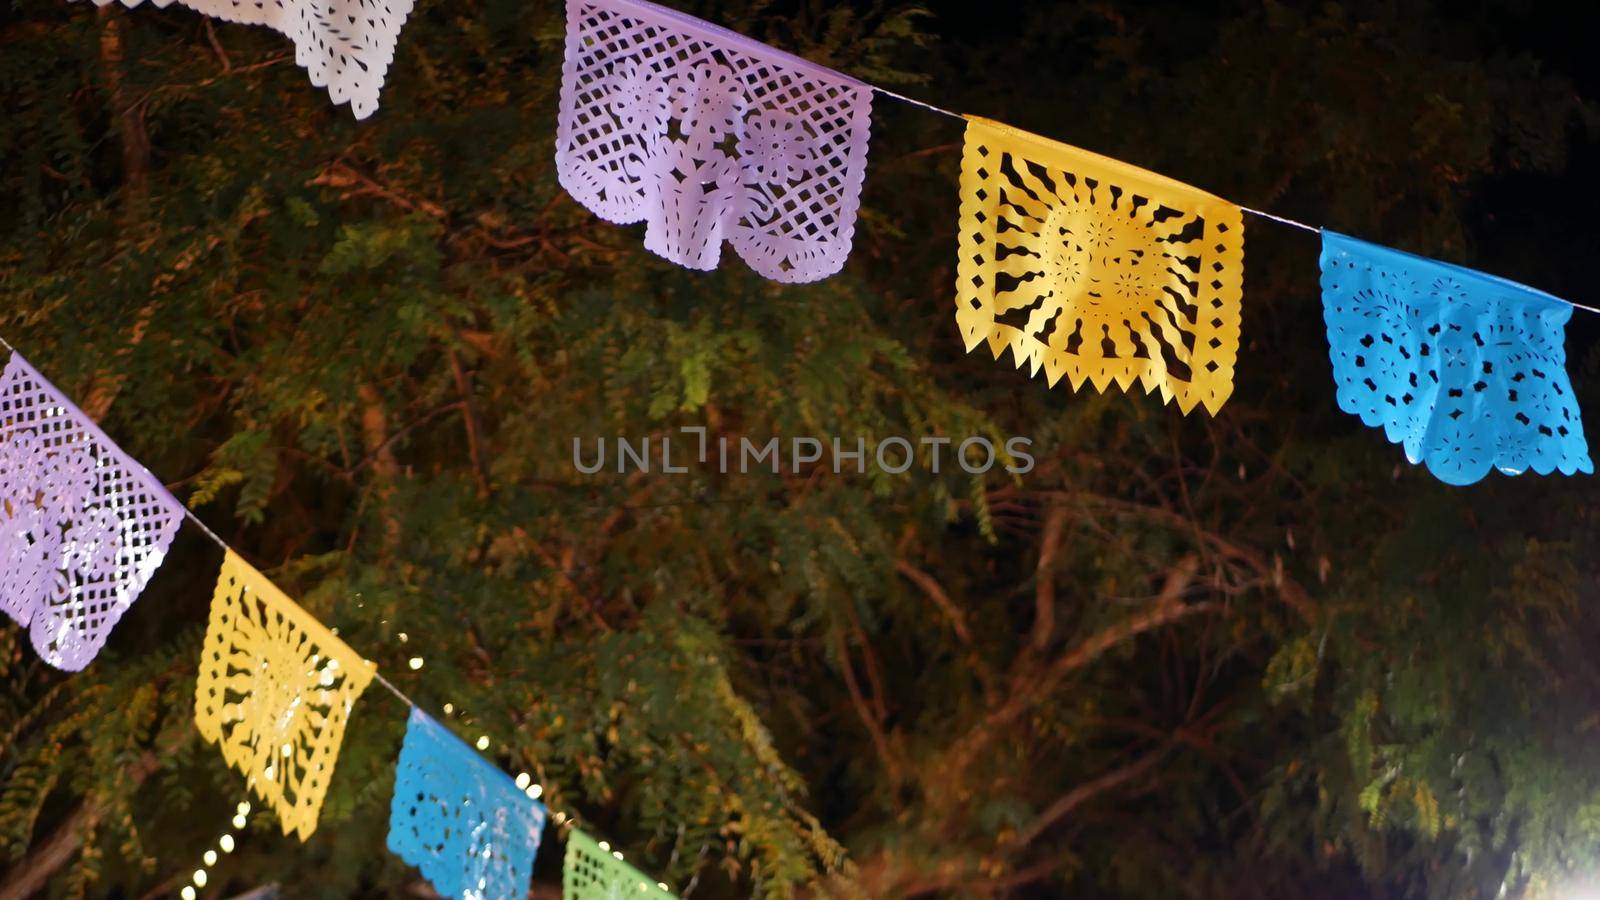 Papel picado garland, paper tissue perforated flags. Mexican colorful ethnic decor for holiday, carnaval, party or fiesta. Festival street decoration, Cinco de Mayo, Day of Dead or Dia de Muertos.